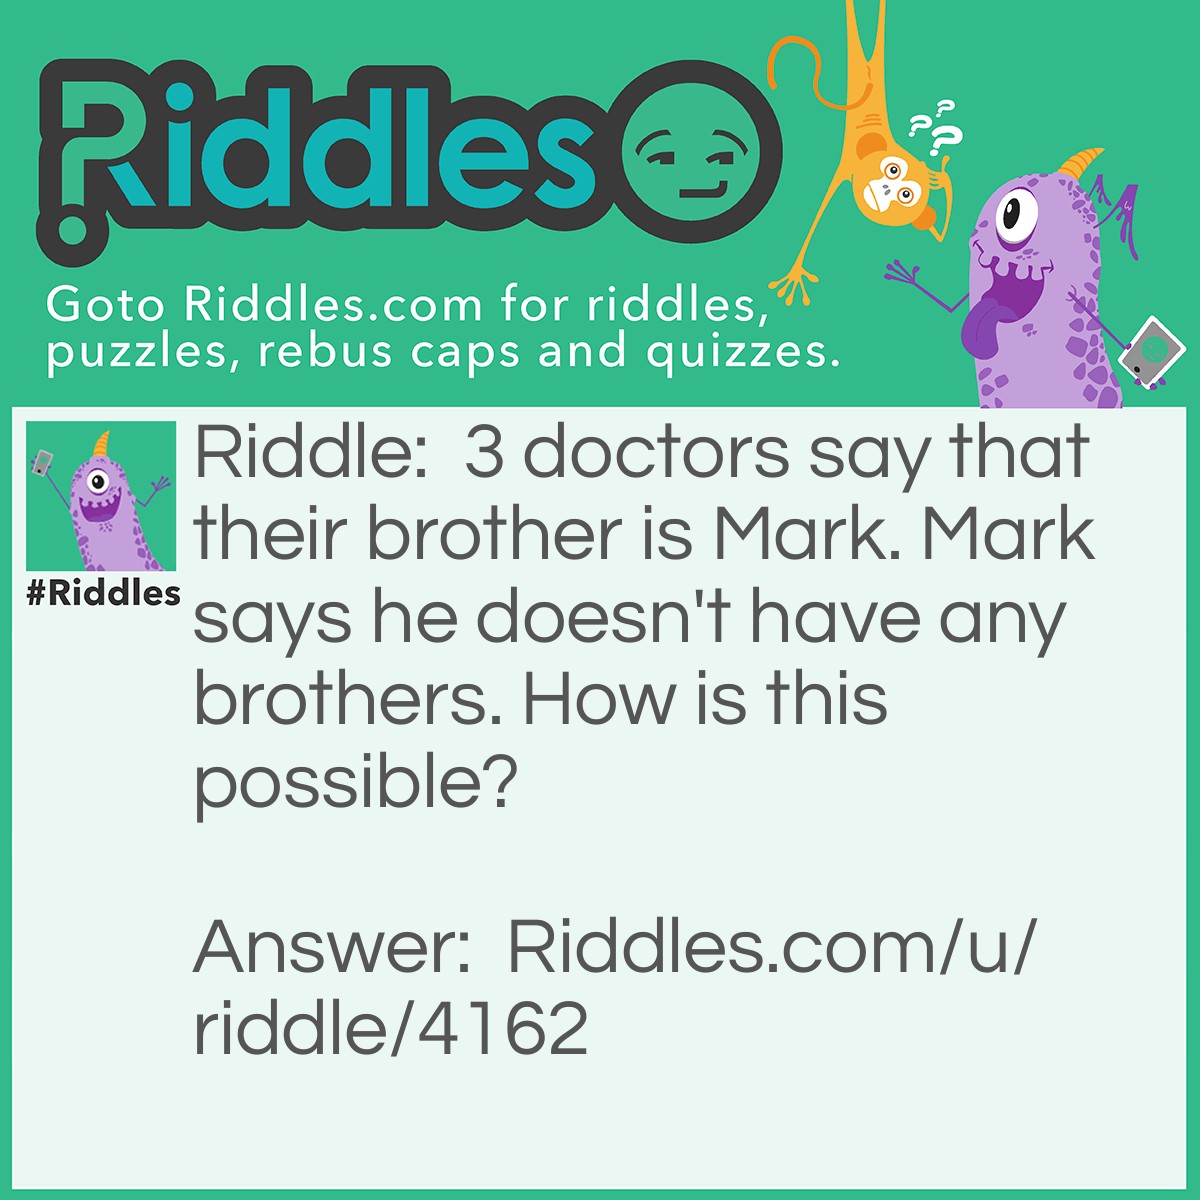 Riddle: 3 doctors say that their brother is Mark. Mark says he doesn't have any brothers. How is this possible? Answer: SISTERS! The most annoying beings on the planet. Or that's at least what my brother say about me and my sister...